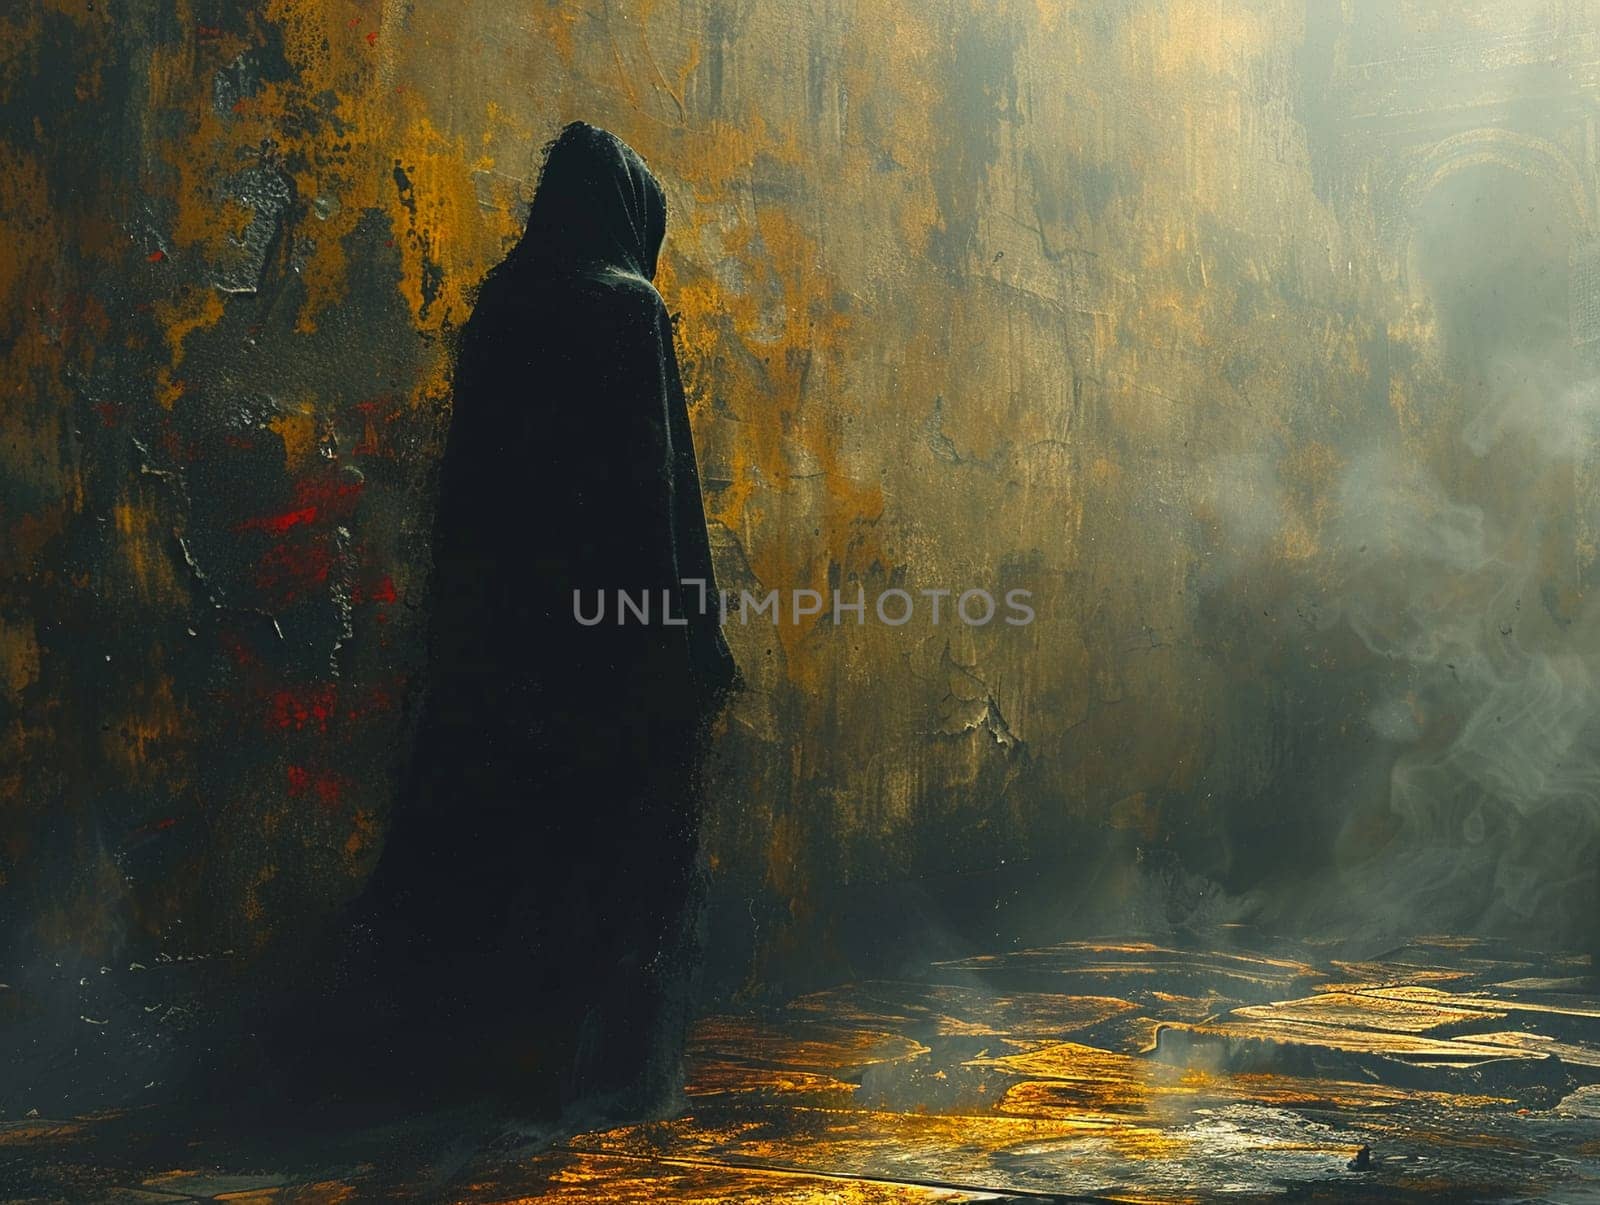 Digital art portrait of a mysterious figure cloaked in shadows by Benzoix